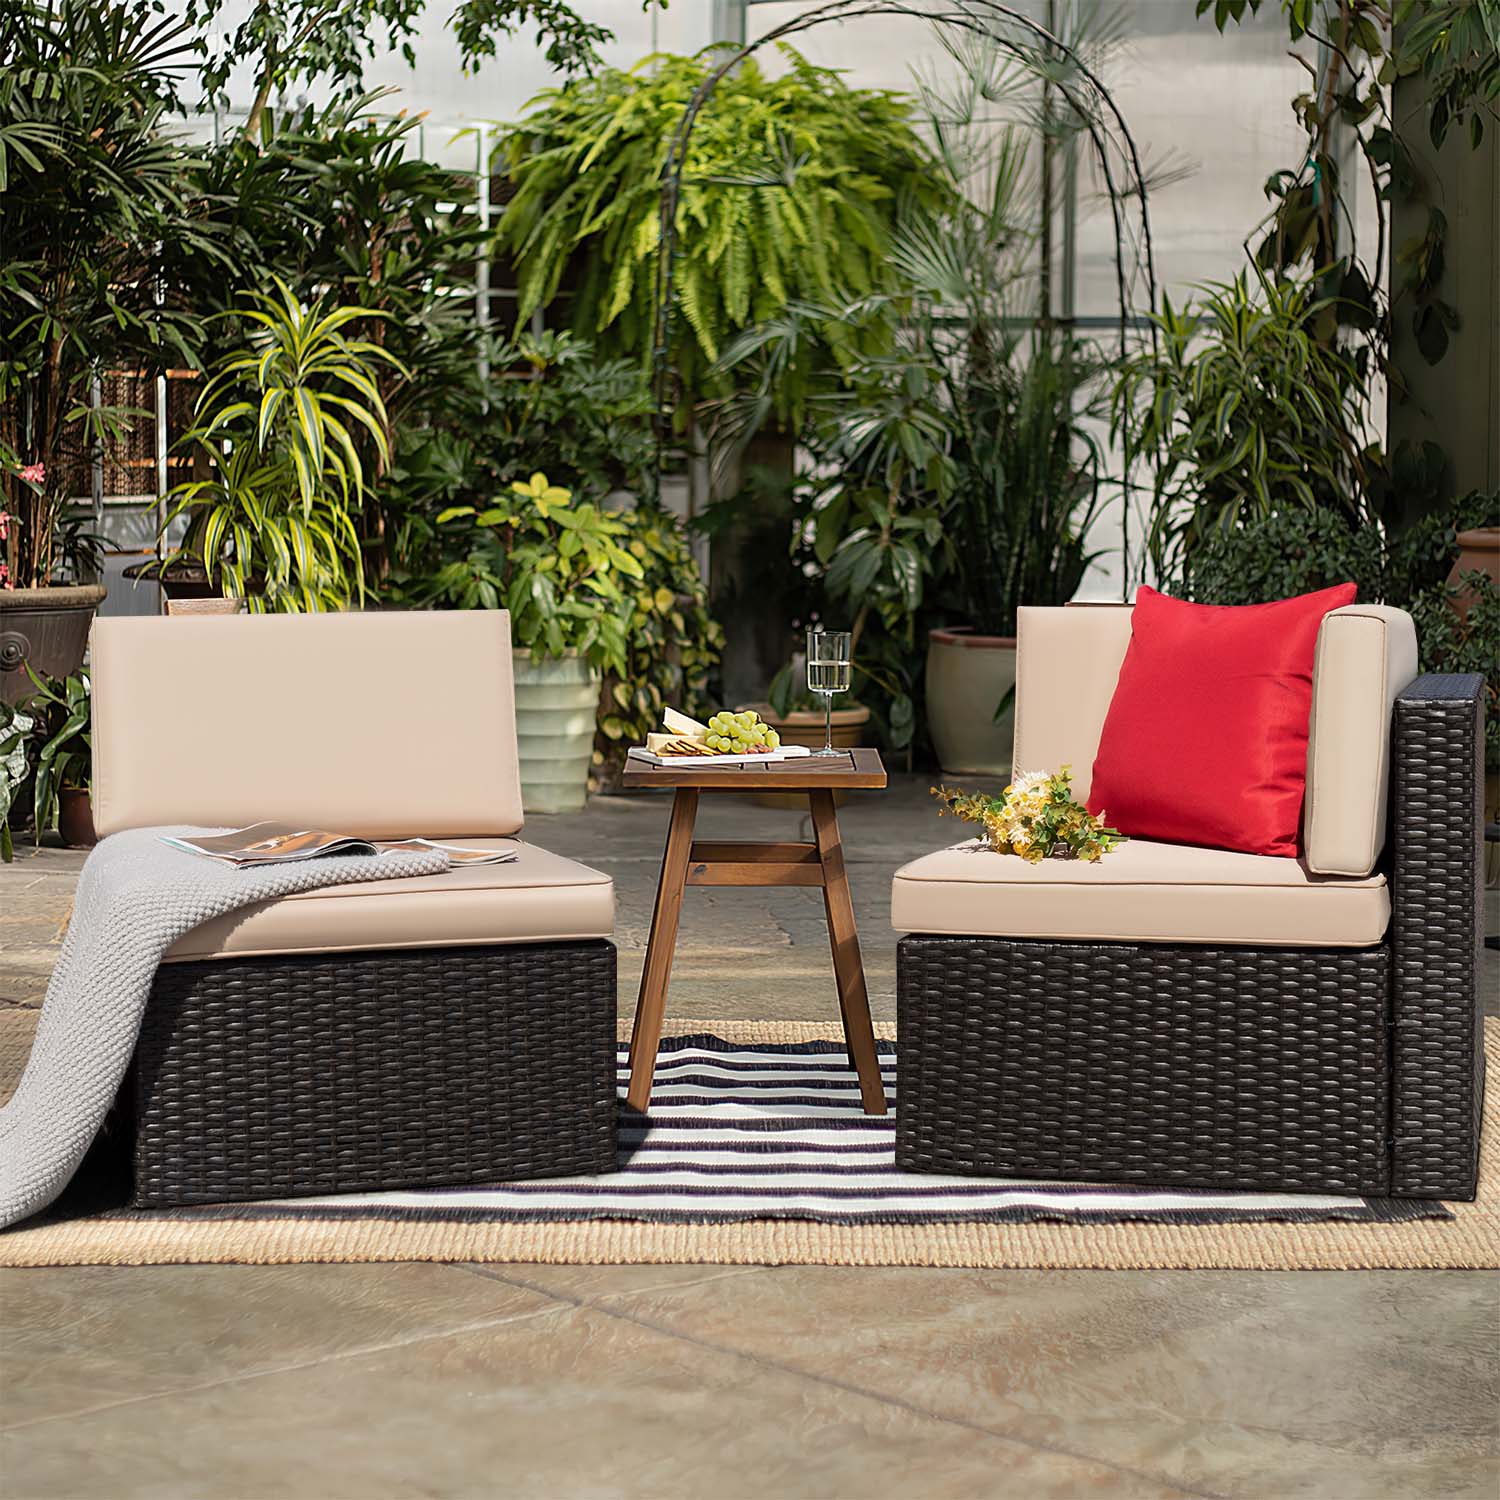 Devoko 2 Pieces Patio Sectional Set Outdoor Rattan Loveseat with Cushions & Red Pillow, Beige - image 1 of 6